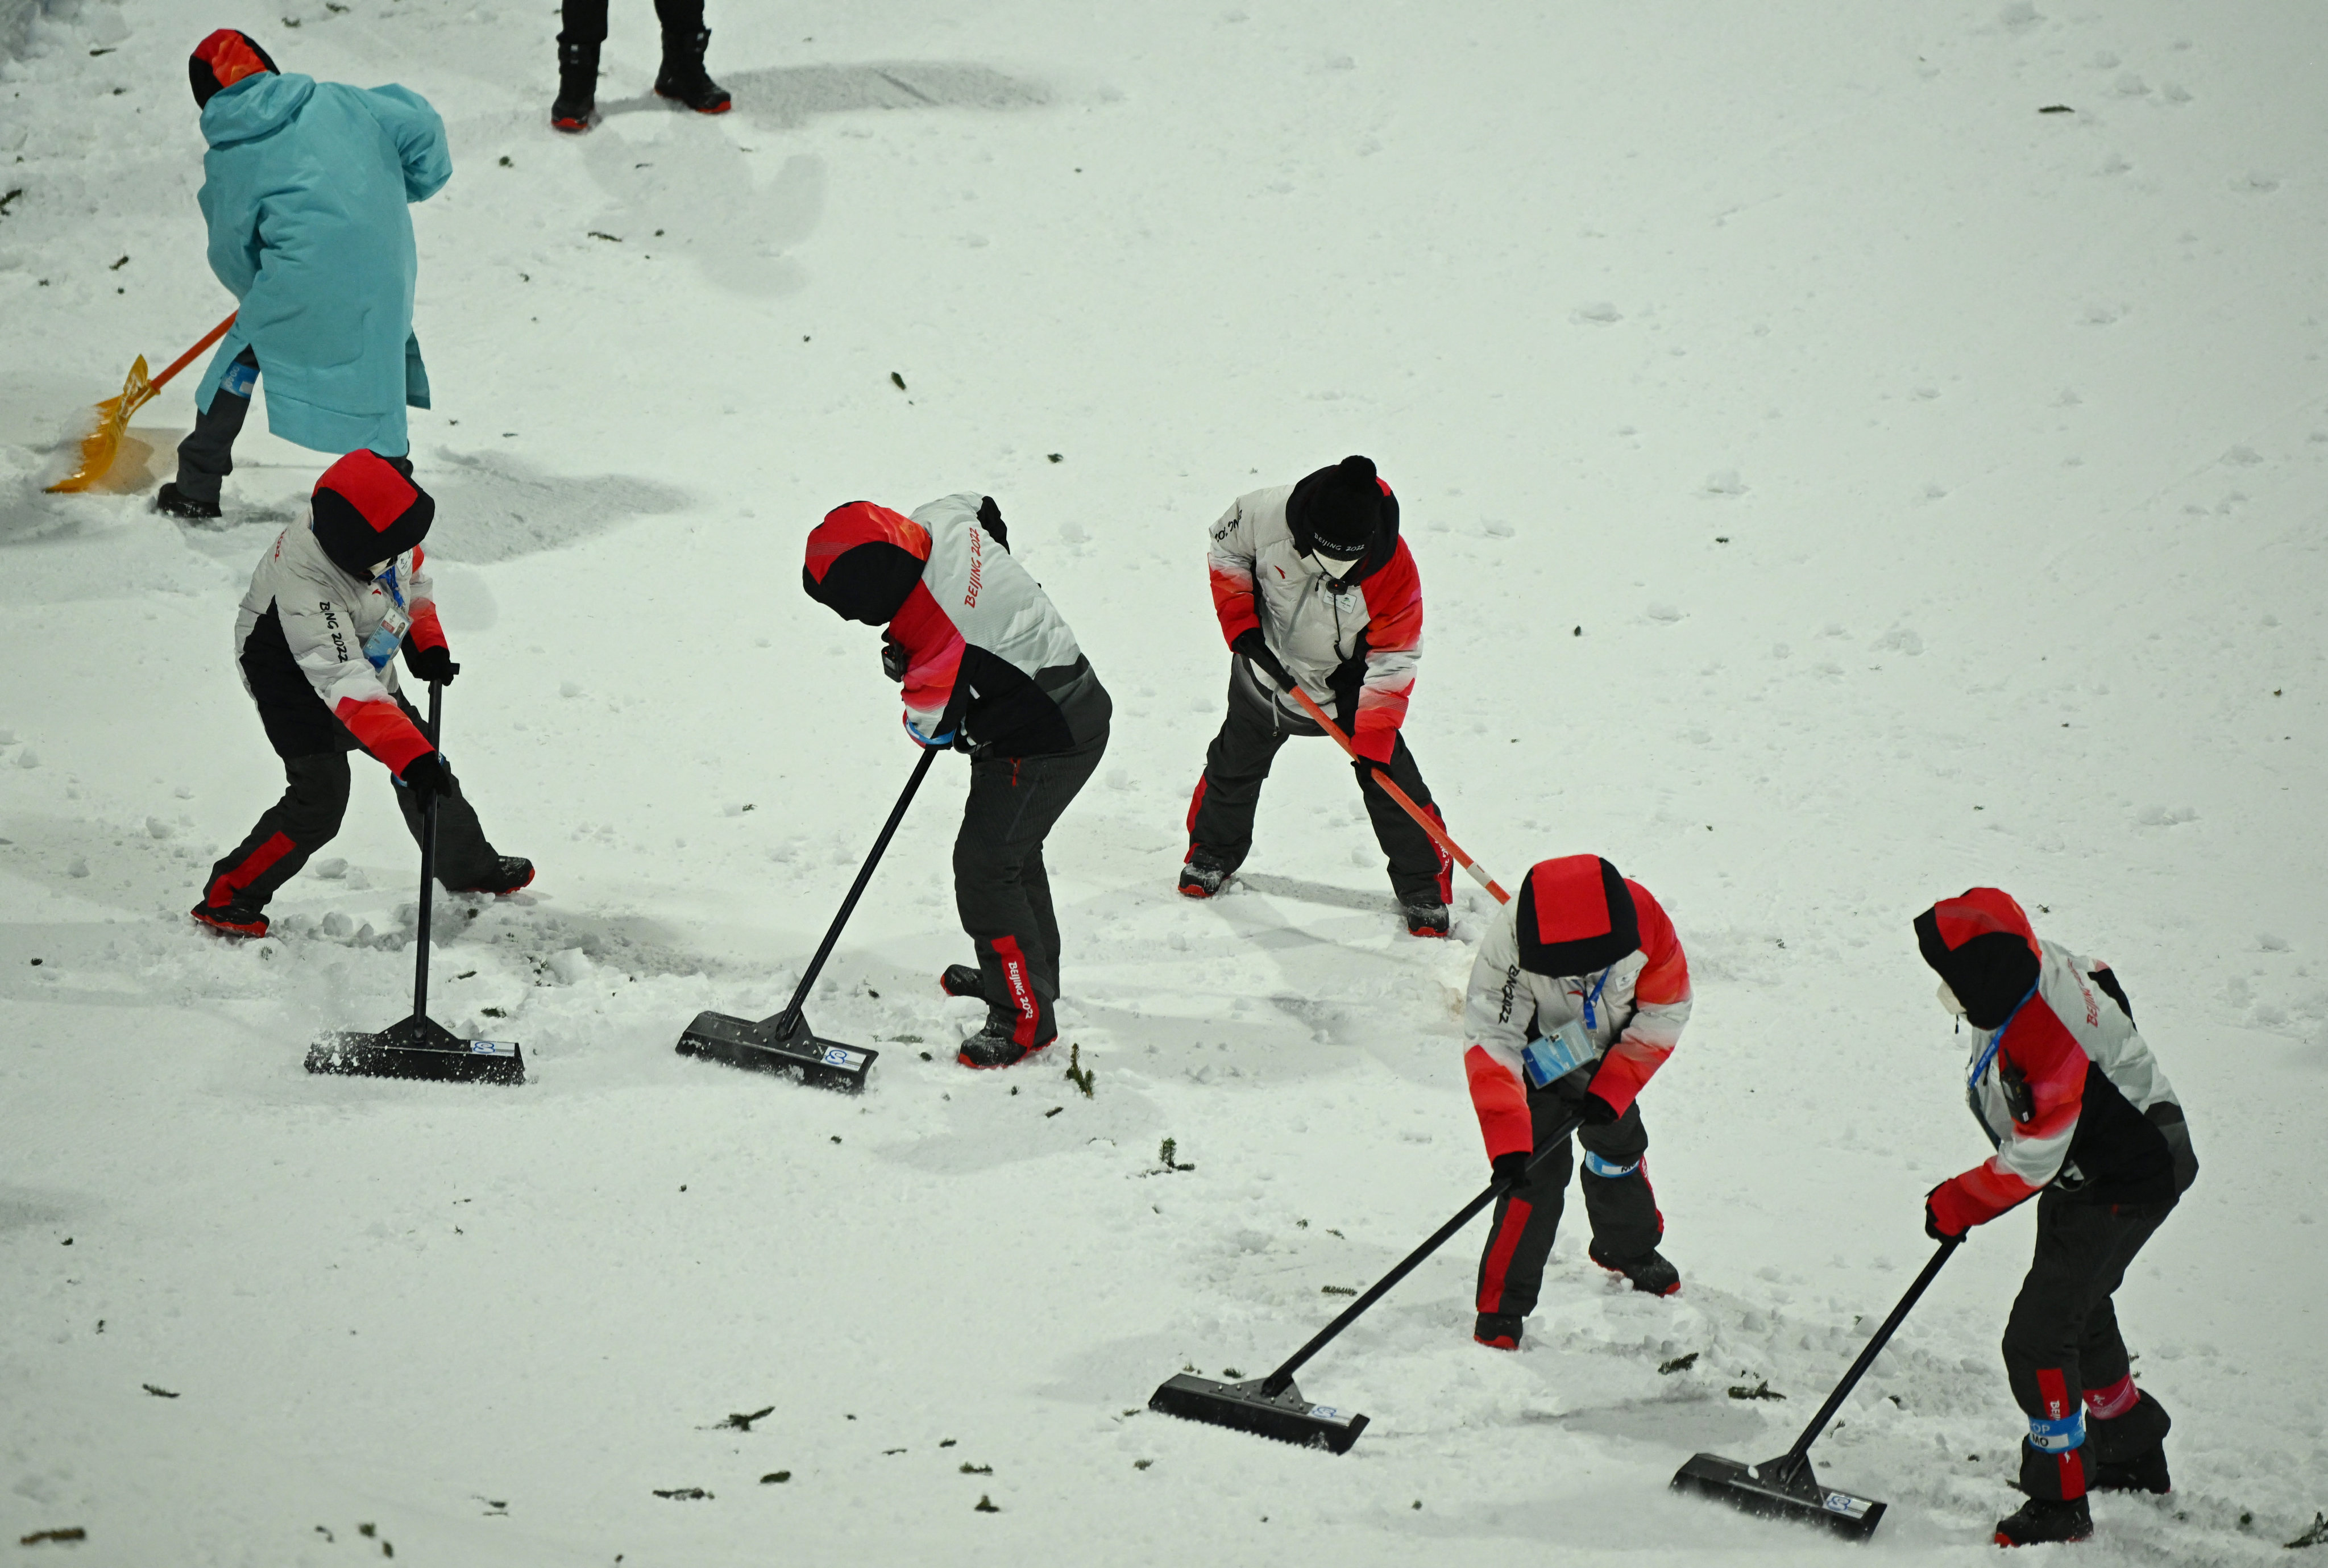 Staff work on the course during freestyle skiing training at the Genting Snow Park in Zhangjiakou, ahead of the Beijing 2022 Winter Olympics. Photo: Reuters/Dylan Martinez